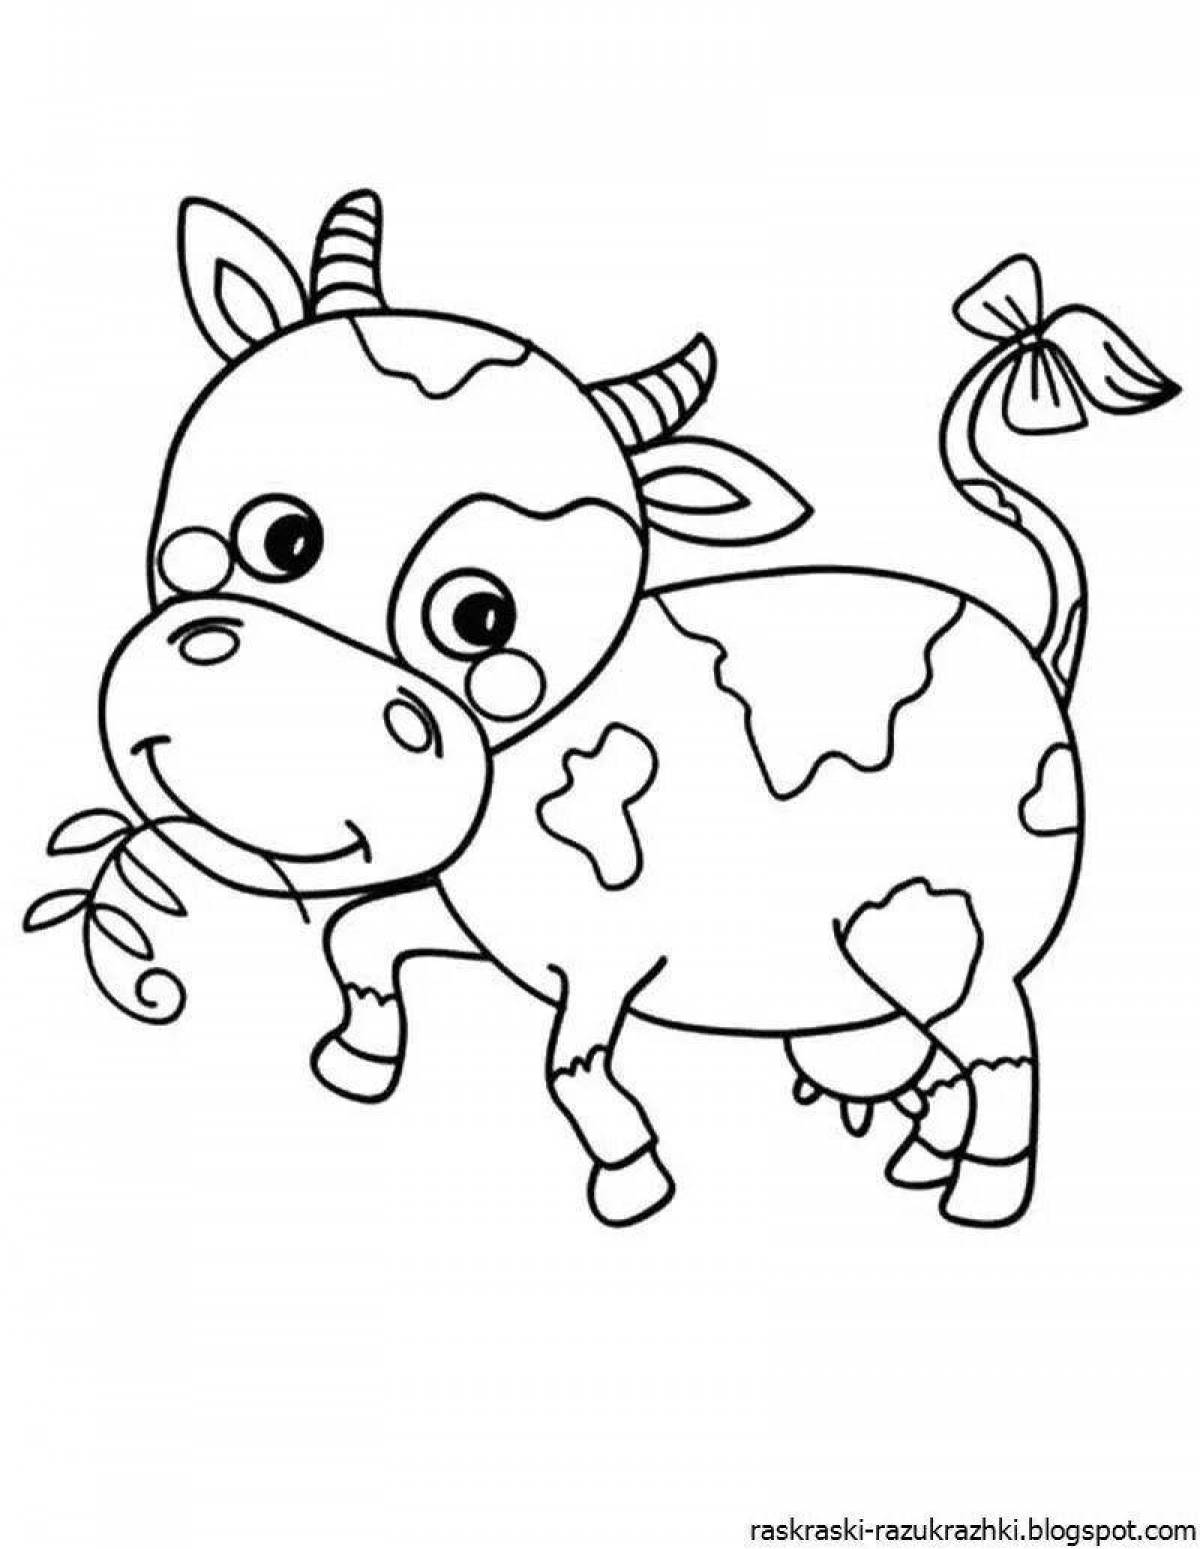 Glowing cow coloring page for kids